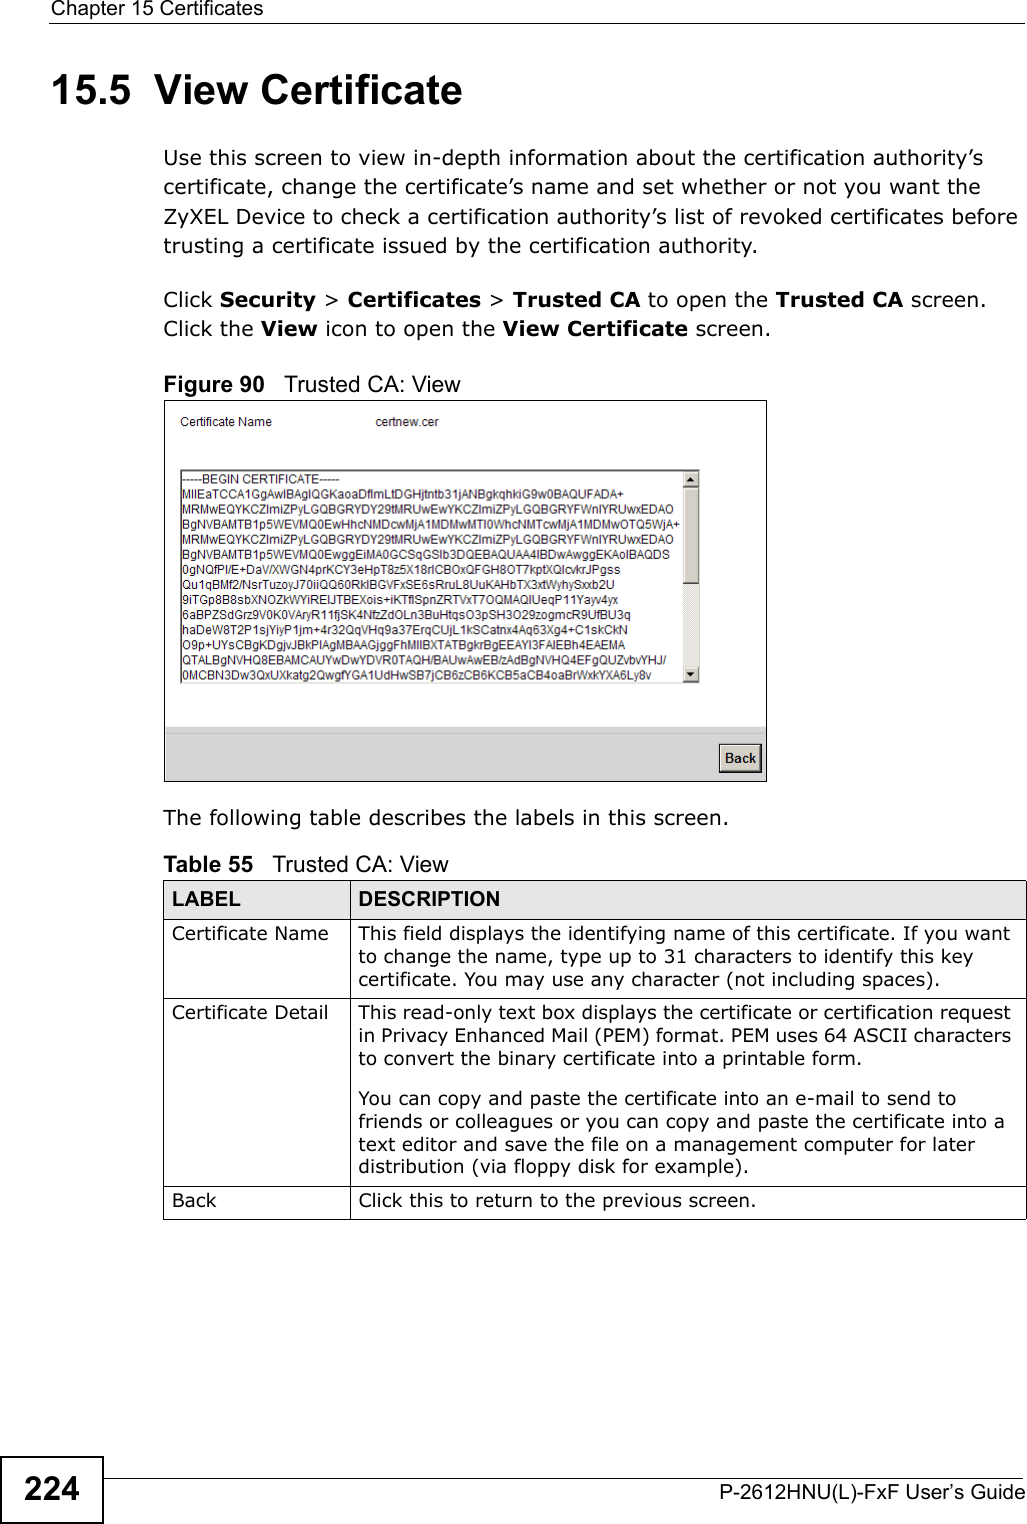 Chapter 15 CertificatesP-2612HNU(L)-FxF User’s Guide22415.5  View Certificate Use this screen to view in-depth information about the certification authority’s certificate, change the certificate’s name and set whether or not you want the ZyXEL Device to check a certification authority’s list of revoked certificates before trusting a certificate issued by the certification authority.Click Security &gt; Certificates &gt; Trusted CA to open the Trusted CA screen.Click the View icon to open the View Certificate screen. Figure 90   Trusted CA: ViewThe following table describes the labels in this screen. Table 55   Trusted CA: ViewLABEL DESCRIPTIONCertificate Name This field displays the identifying name of this certificate. If you want to change the name, type up to 31 characters to identify this key certificate. You may use any character (not including spaces).Certificate Detail This read-only text box displays the certificate or certification request in Privacy Enhanced Mail (PEM) format. PEM uses 64 ASCII characters to convert the binary certificate into a printable form. You can copy and paste the certificate into an e-mail to send to friends or colleagues or you can copy and paste the certificate into a text editor and save the file on a management computer for later distribution (via floppy disk for example).Back Click this to return to the previous screen.